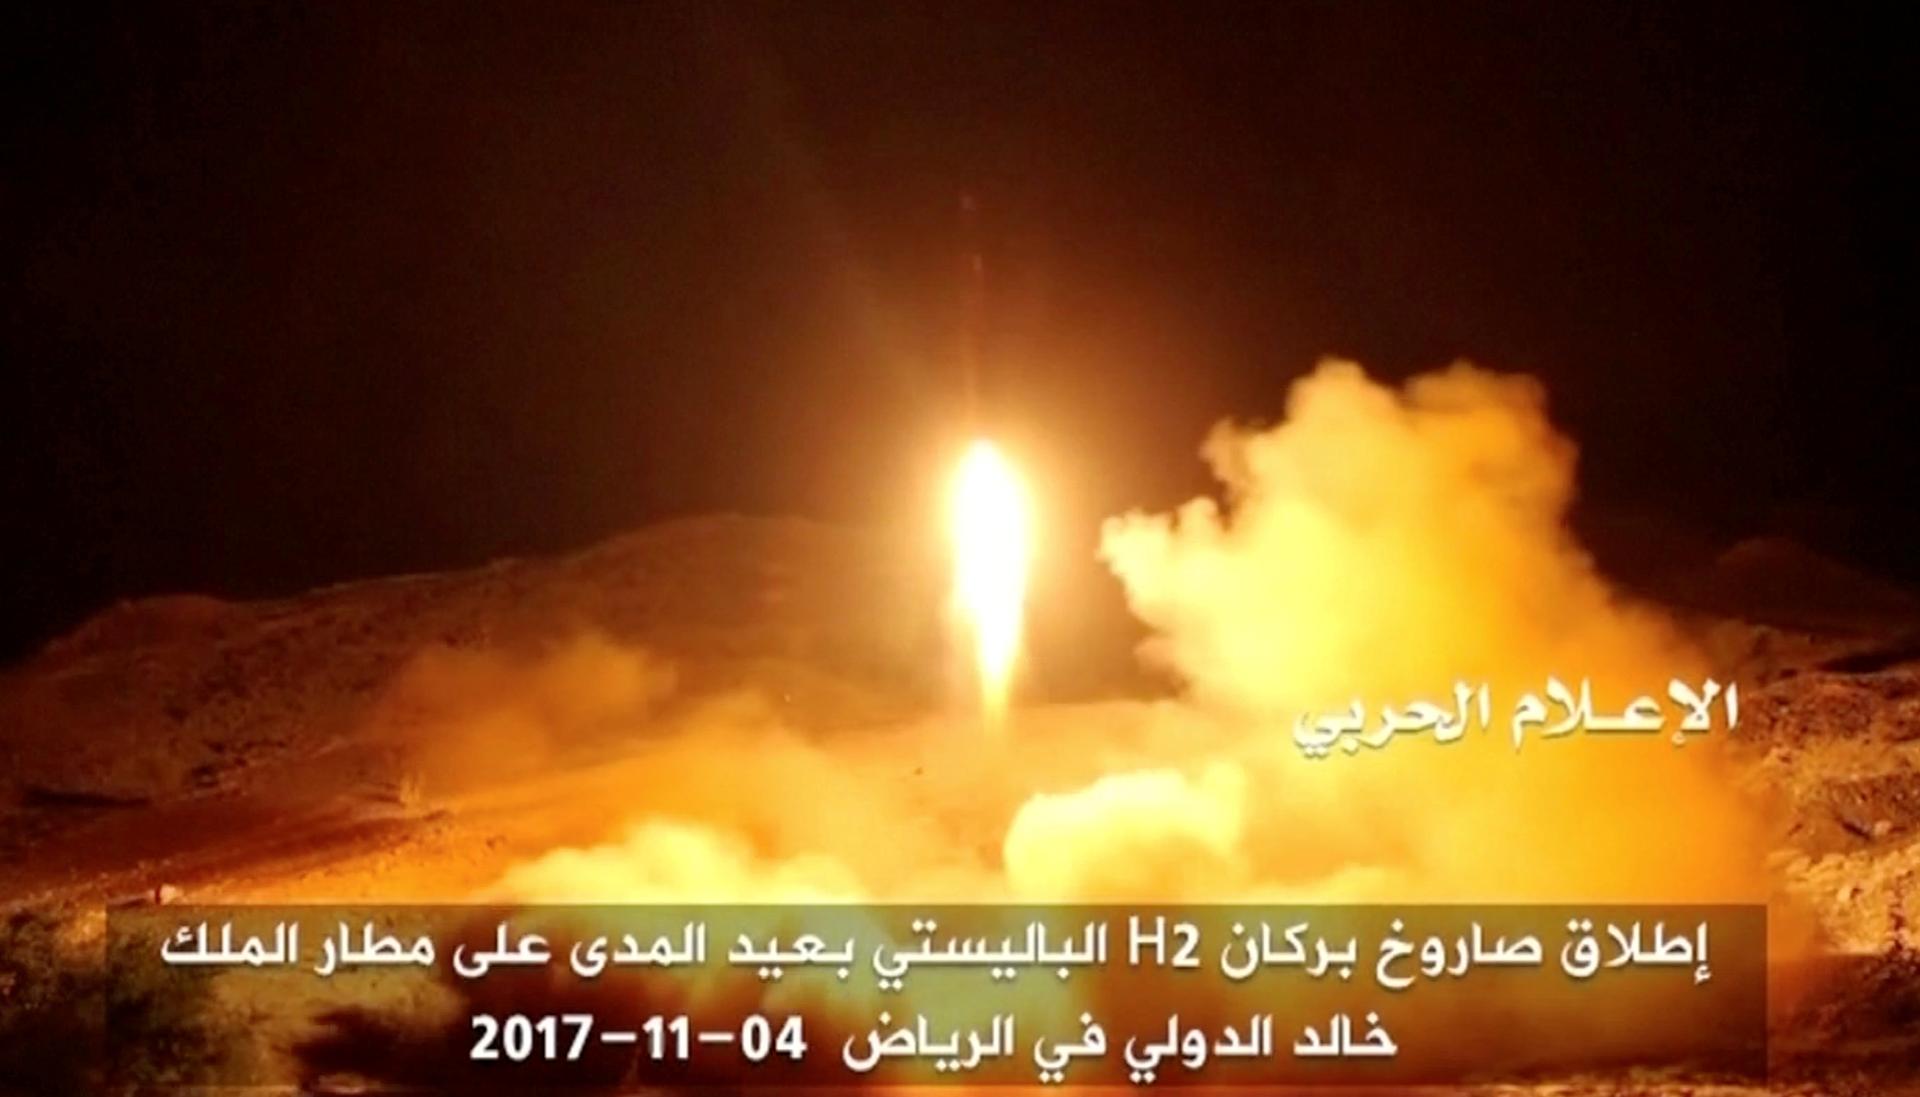 the launch by Houthi forces of a ballistic missile aimed at Riyadh's King Khaled Airport